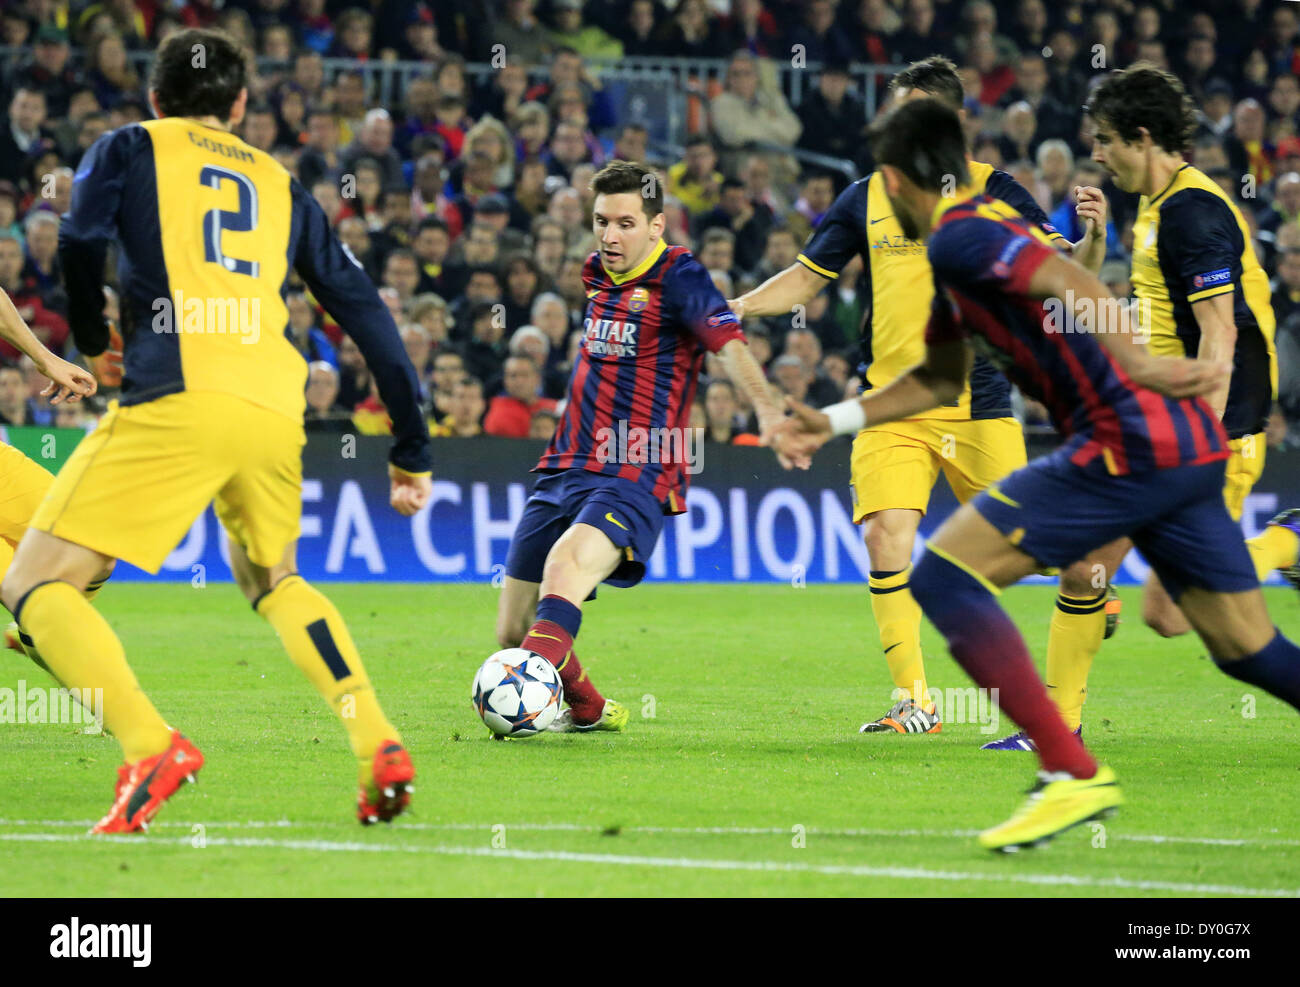 Barcelona, Spain. 1st Apr, 2014. Leo Messi in the match between FC Barcelona and Atletico de Madrid for the first leg of the quarterfinals round of the Champions League at the Camp Nou on April 1, 2014. Photo: Joan Valls/Urbanandsport/Nurphoto. Credit:  Joan Valls/NurPhoto/ZUMAPRESS.com/Alamy Live News Stock Photo